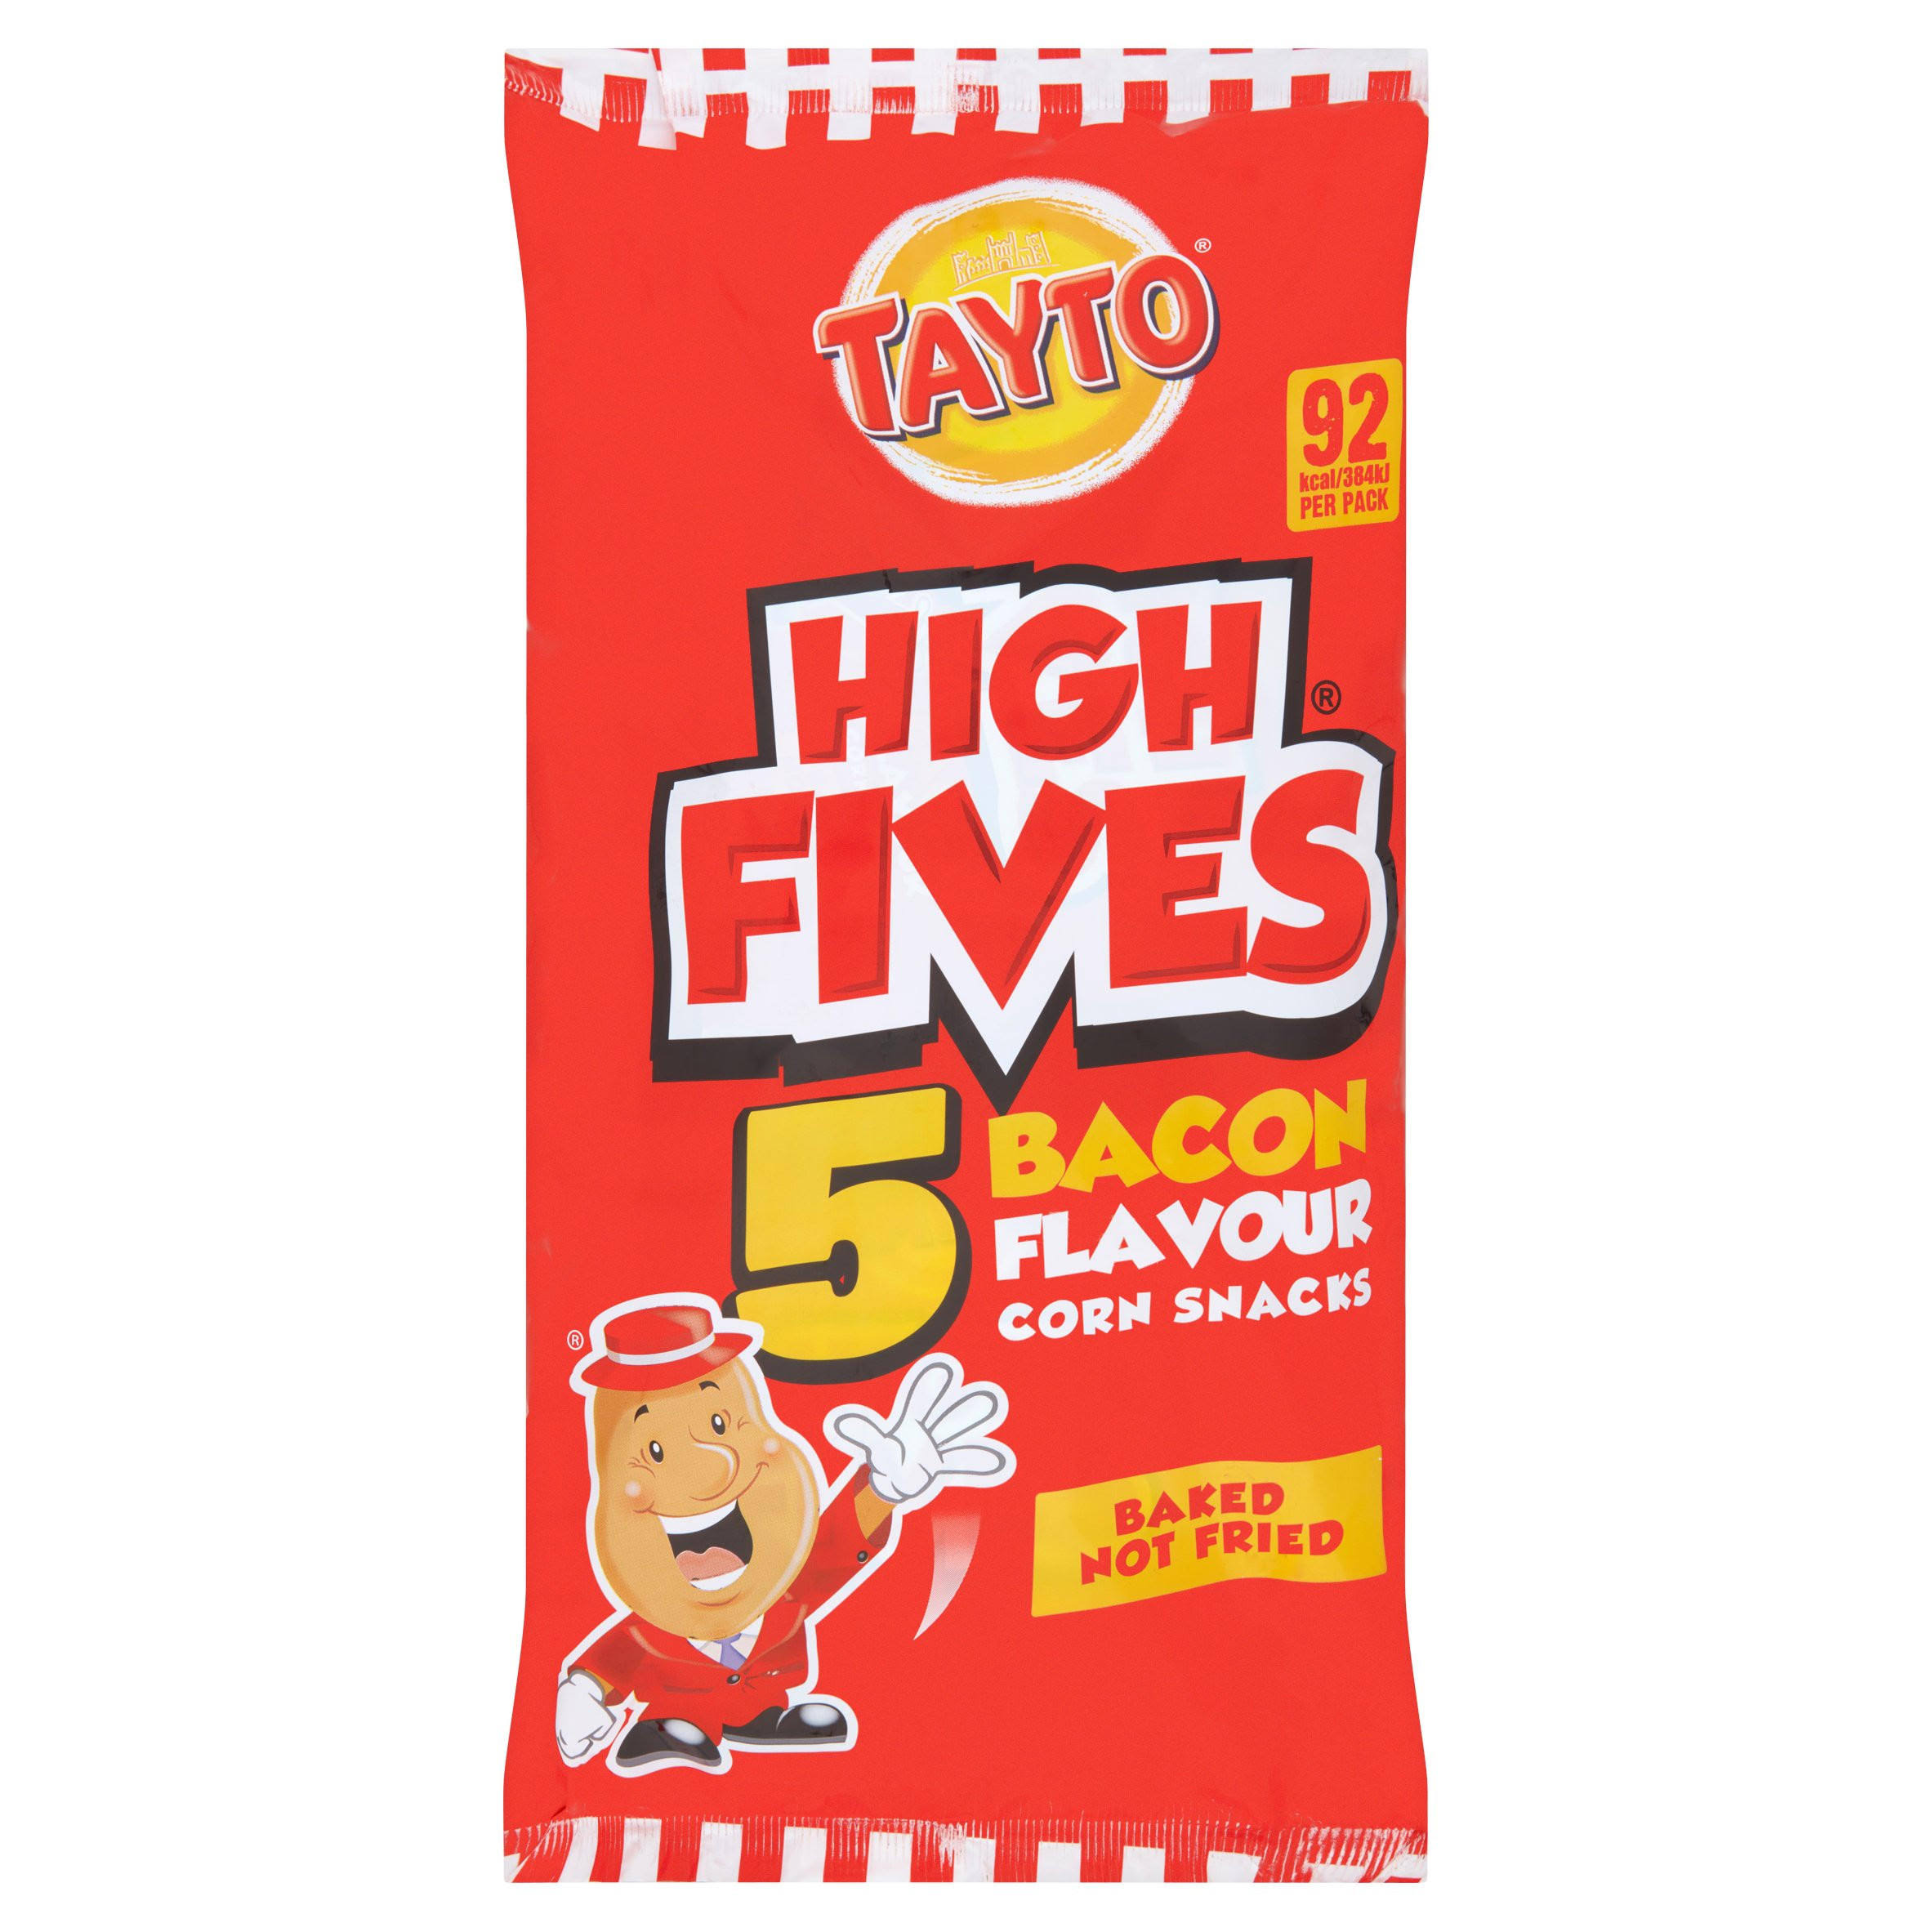 Tayto High Fives 5 Bacon Flavour Corn Snack - 20g